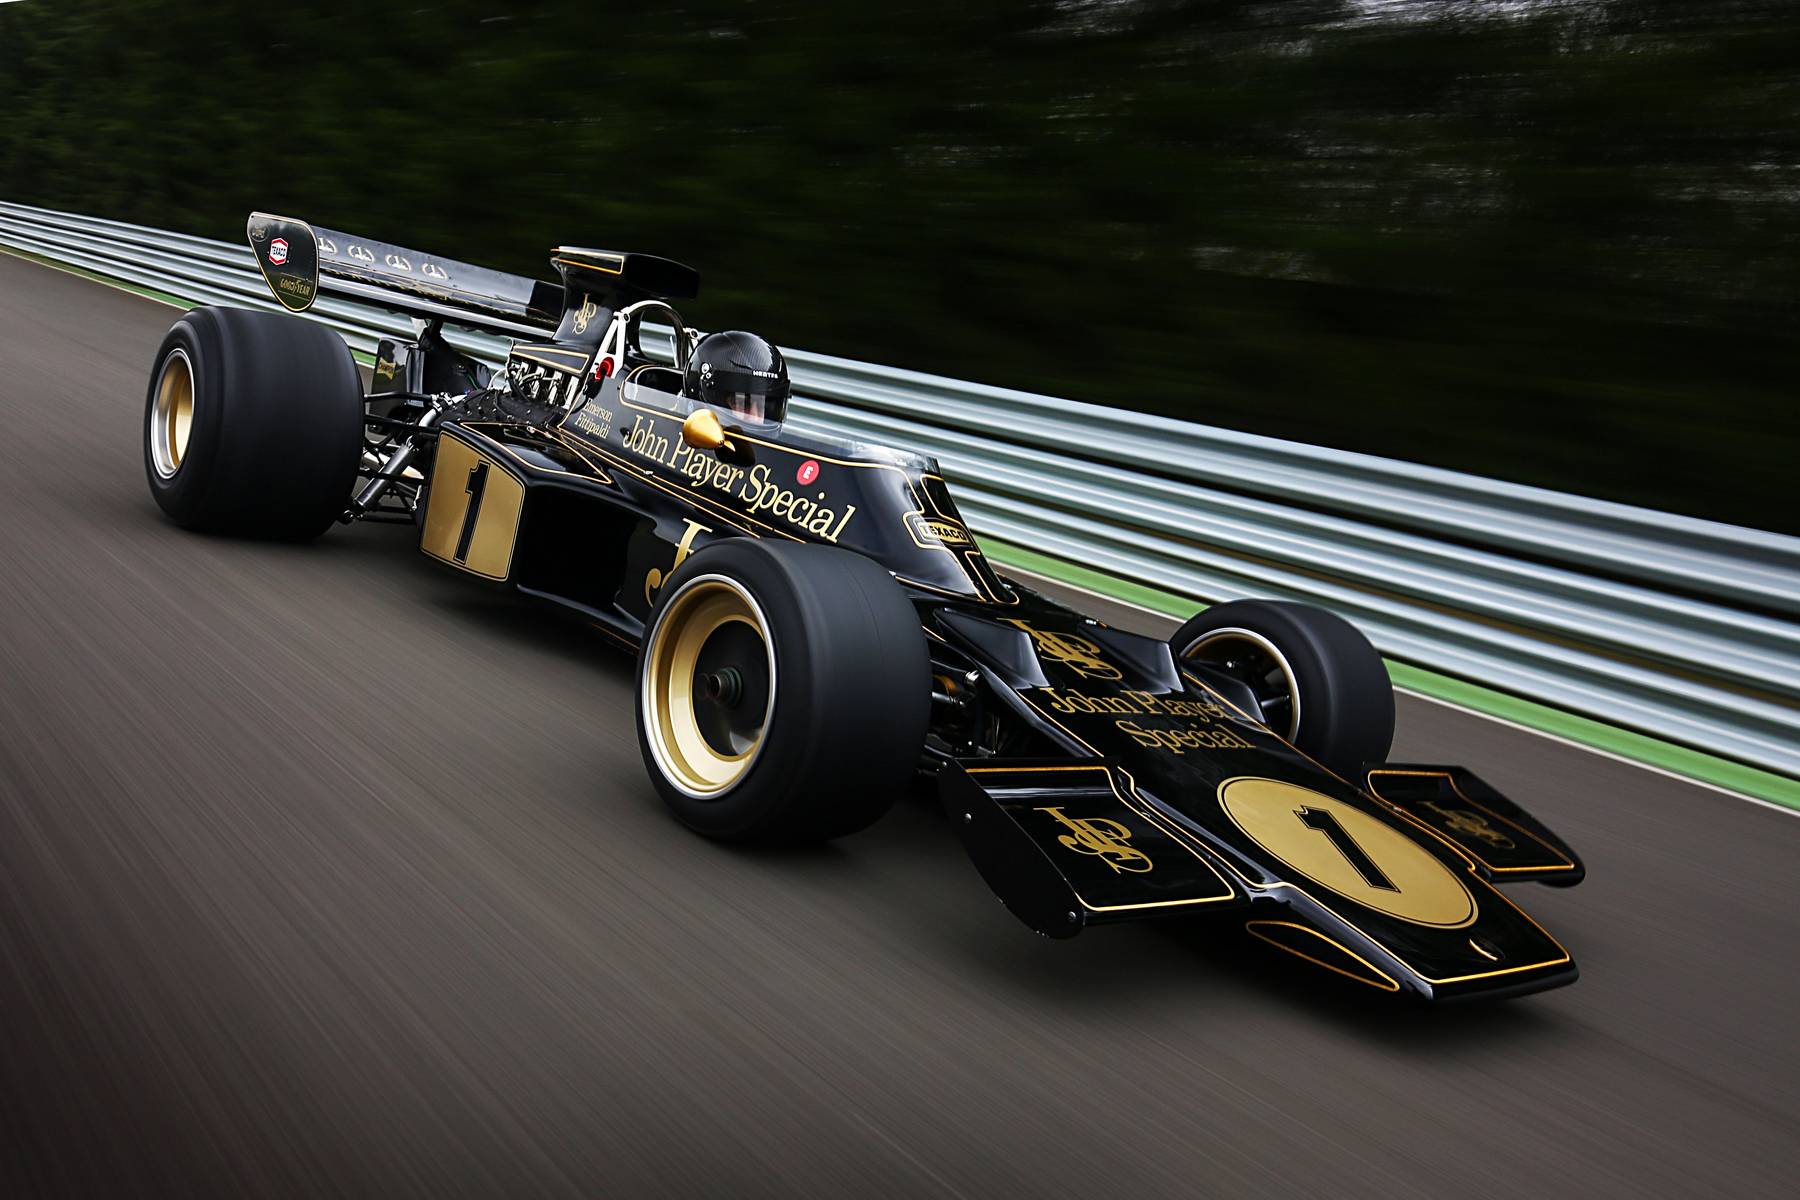 Lotus is greatest ever F1 car